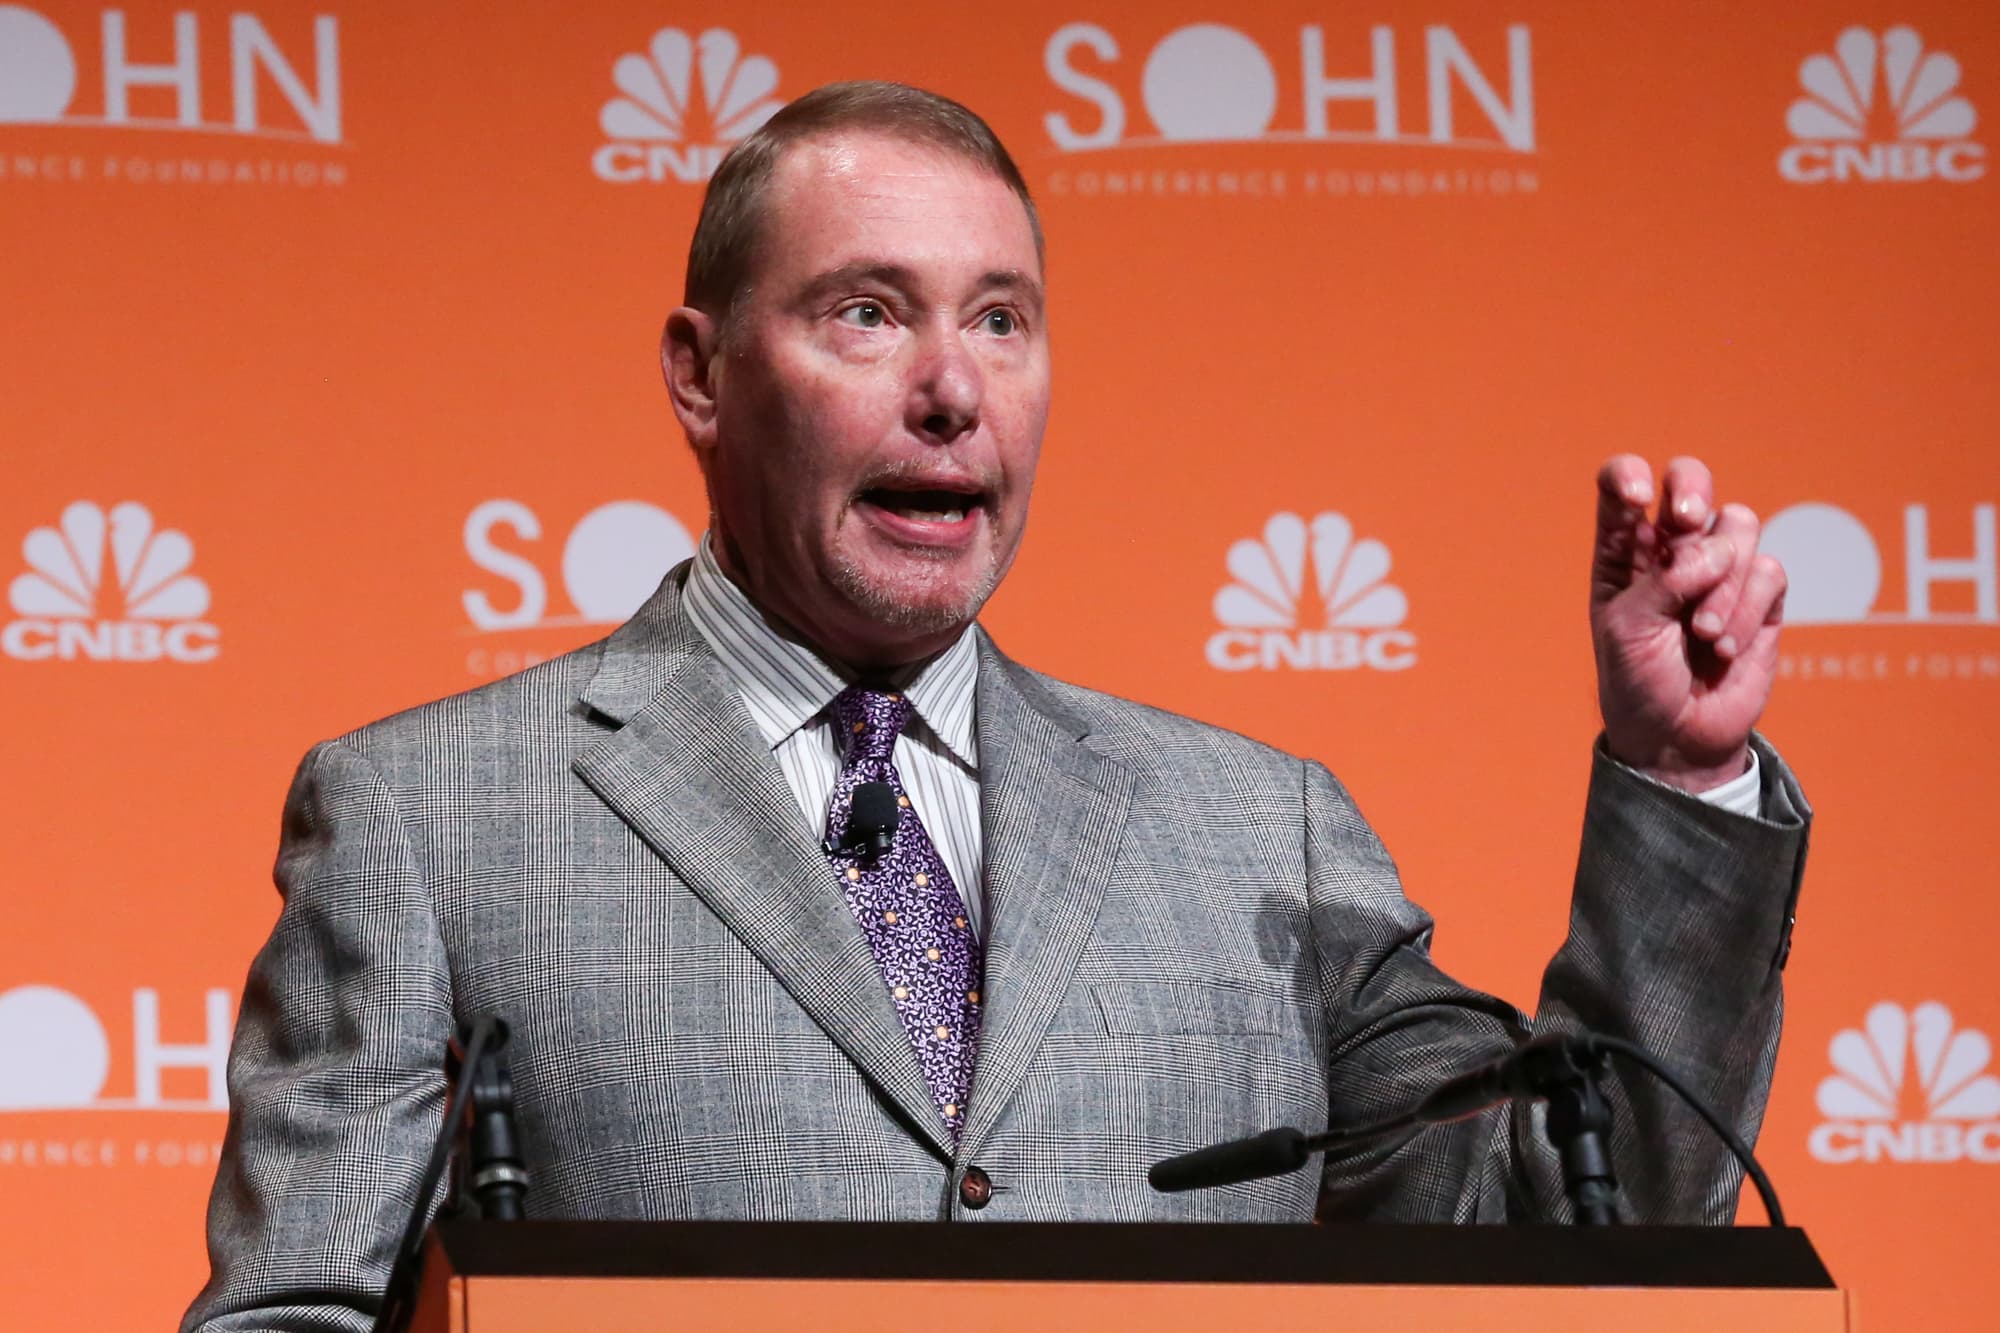 DoubleLine's Gundlach said 2023 will be a fall year for the Fed to start cutting rates.